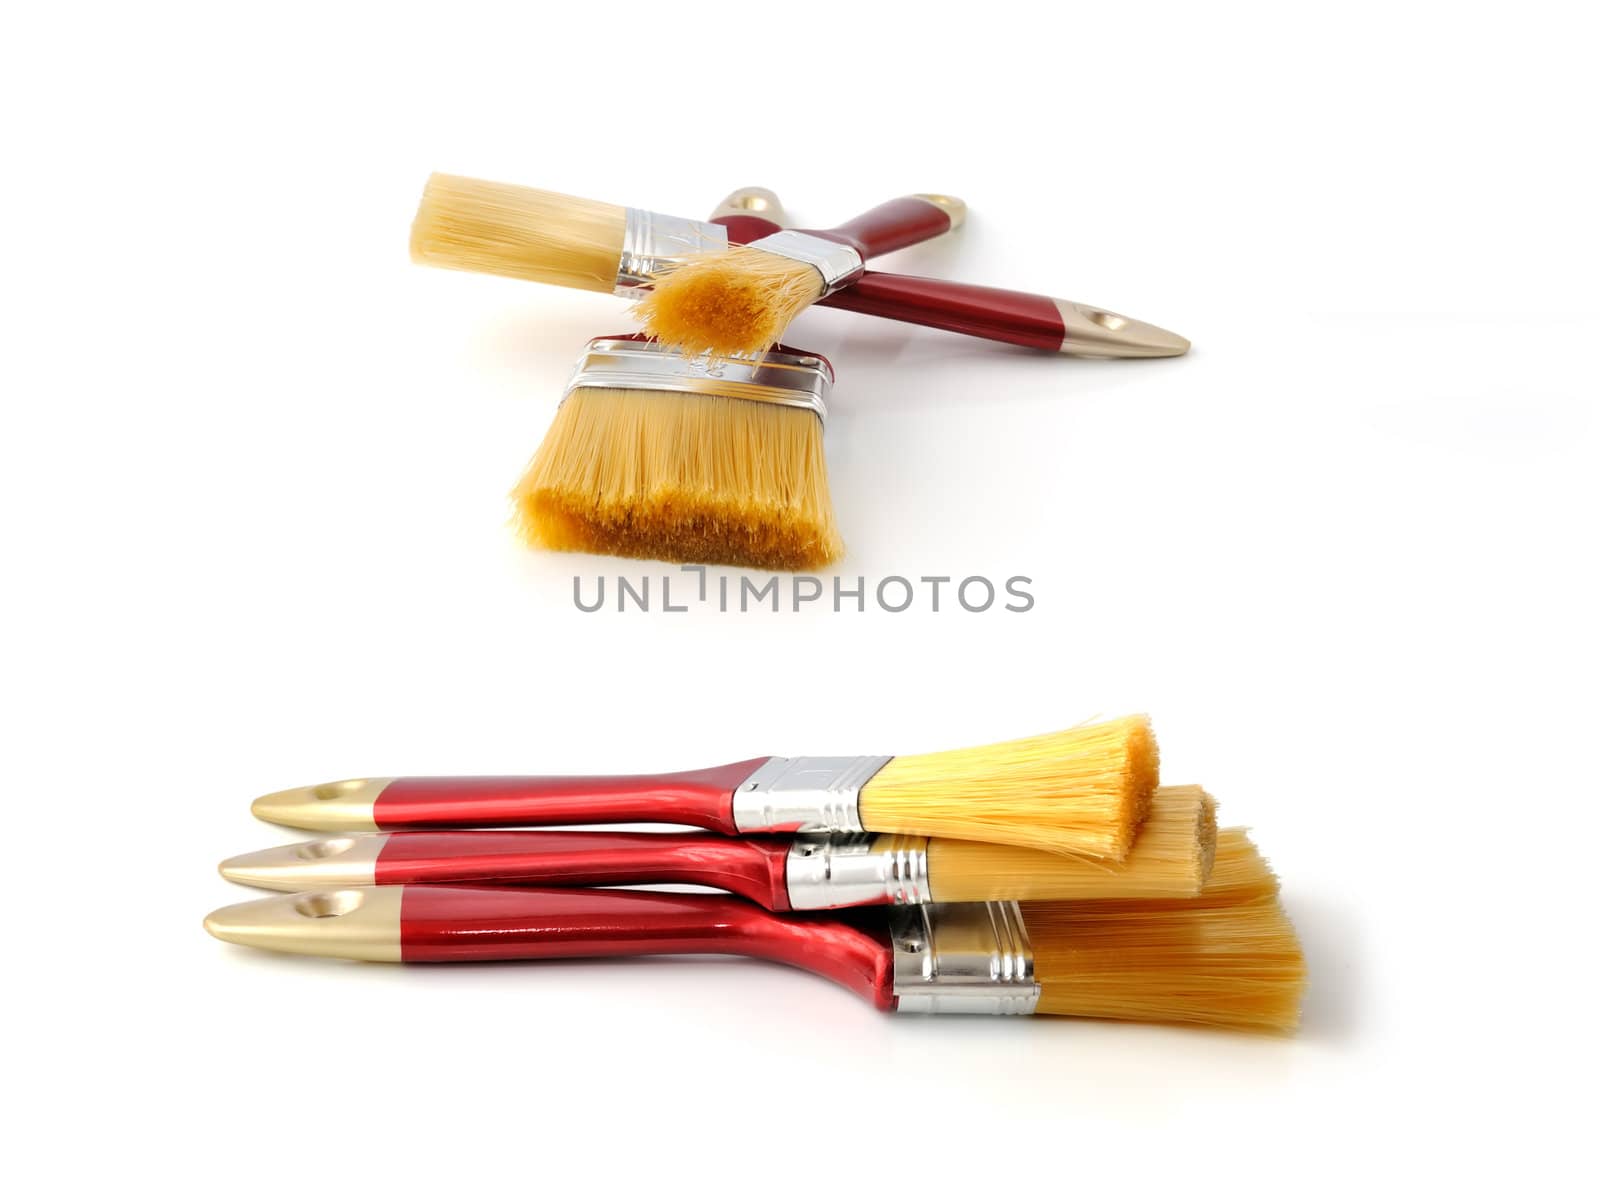 Three clean paint brushes stacked on each other isolated

